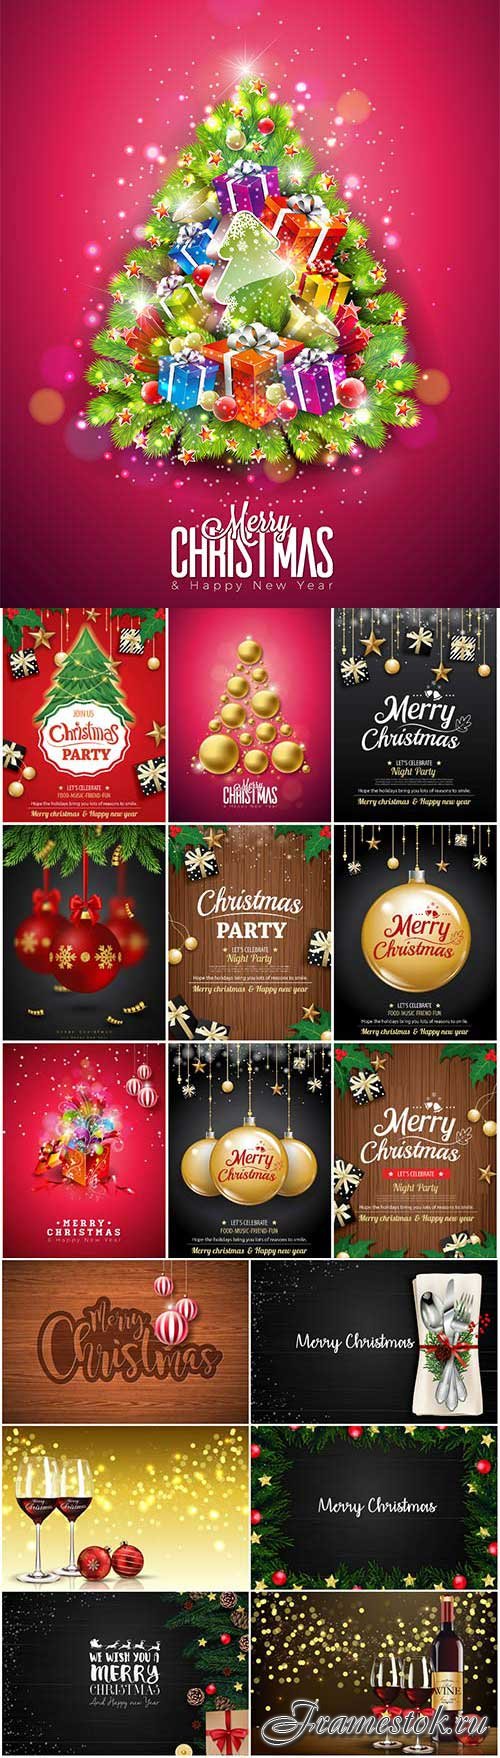 New Year and Christmas vector vol 10